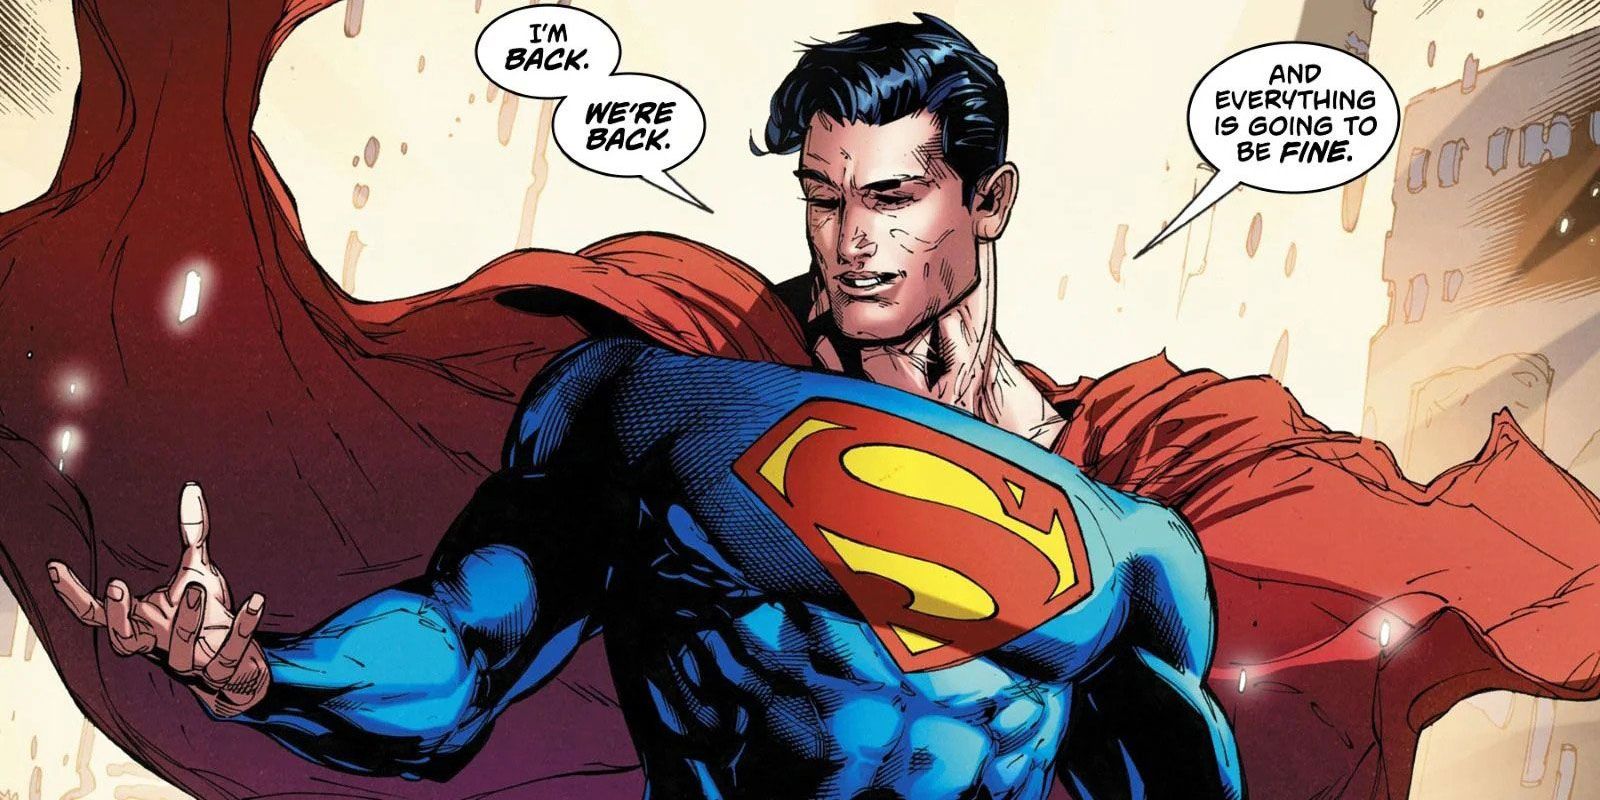 Comic panel from Superman Reborn: &quot;I'm back. We're back. And everything is going to be fine.&quot;